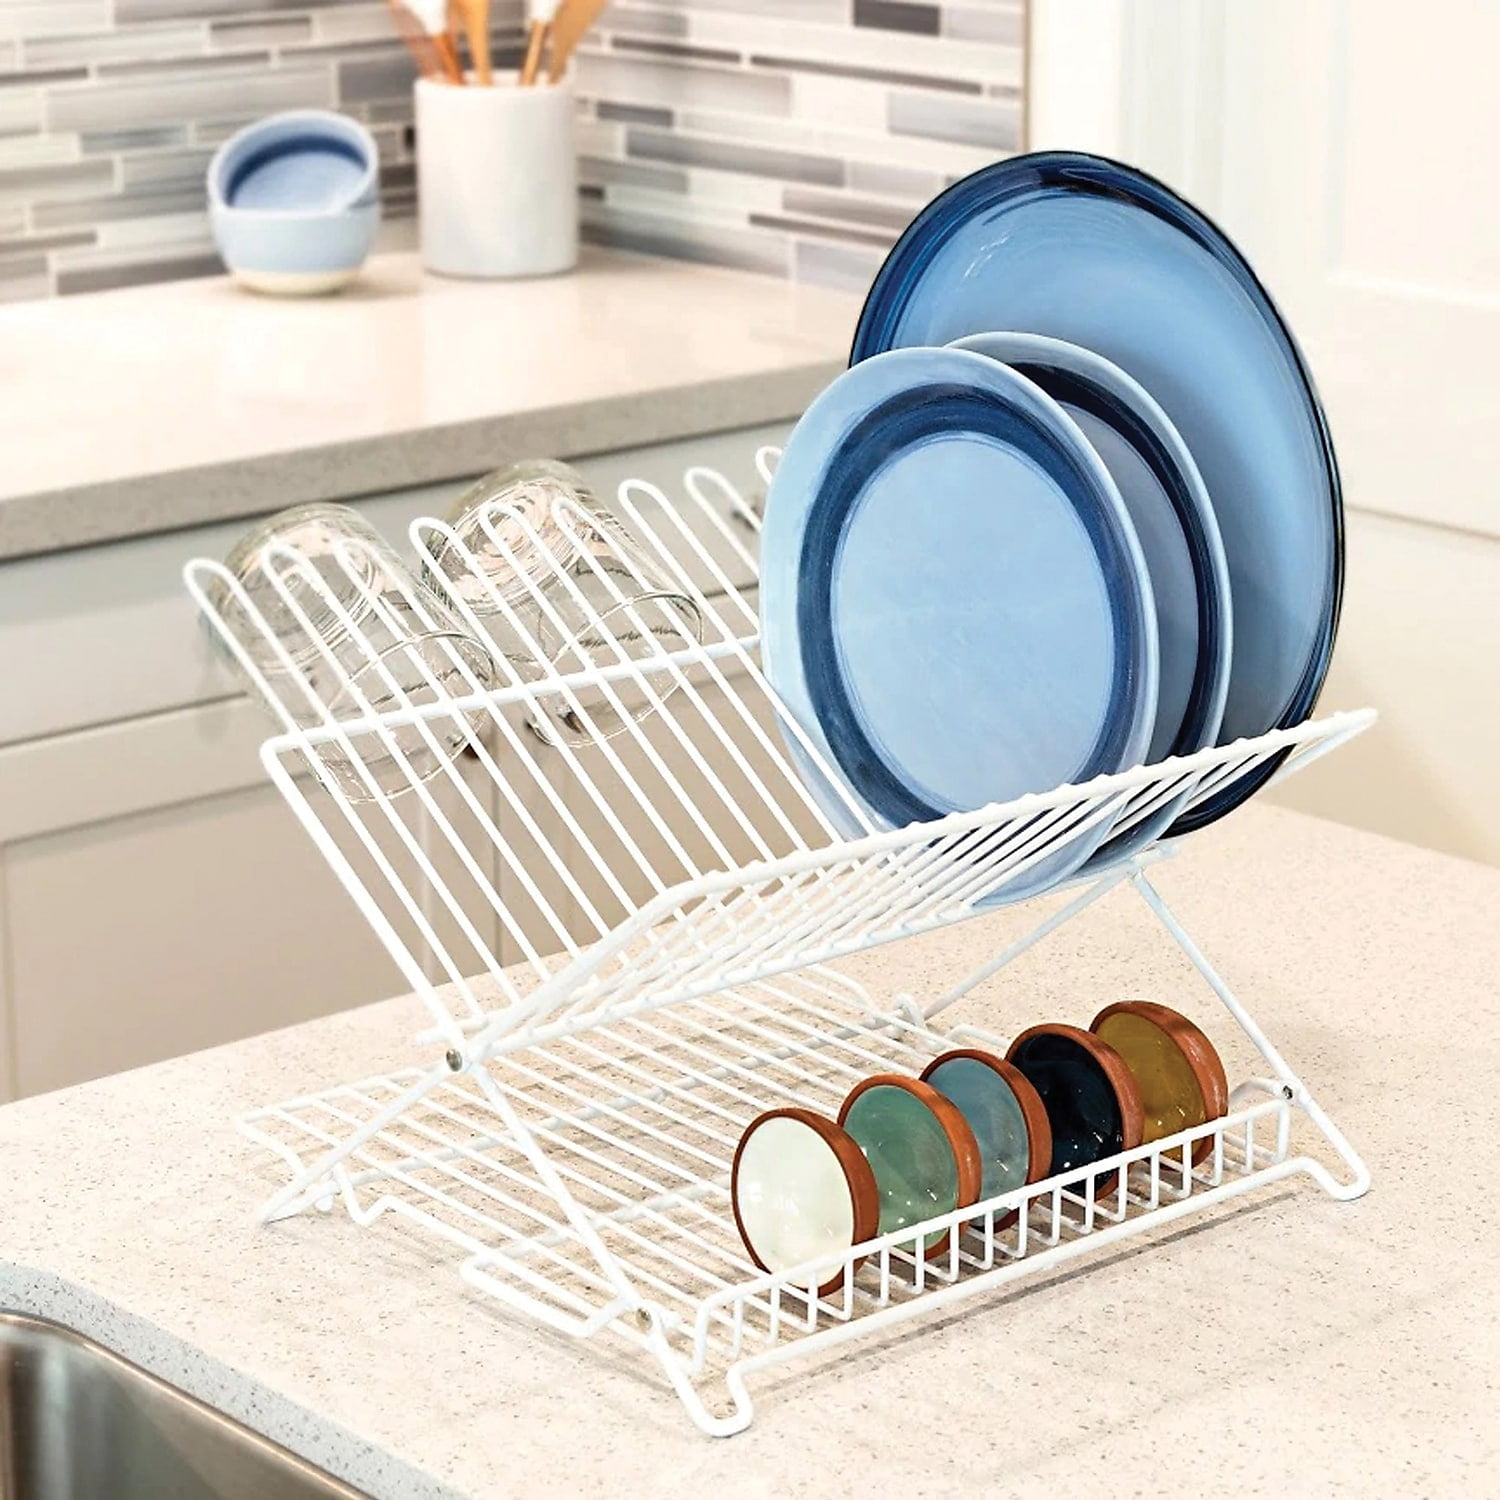 Folding dish drying rack is coolest thing for every kitchen - Homecrux